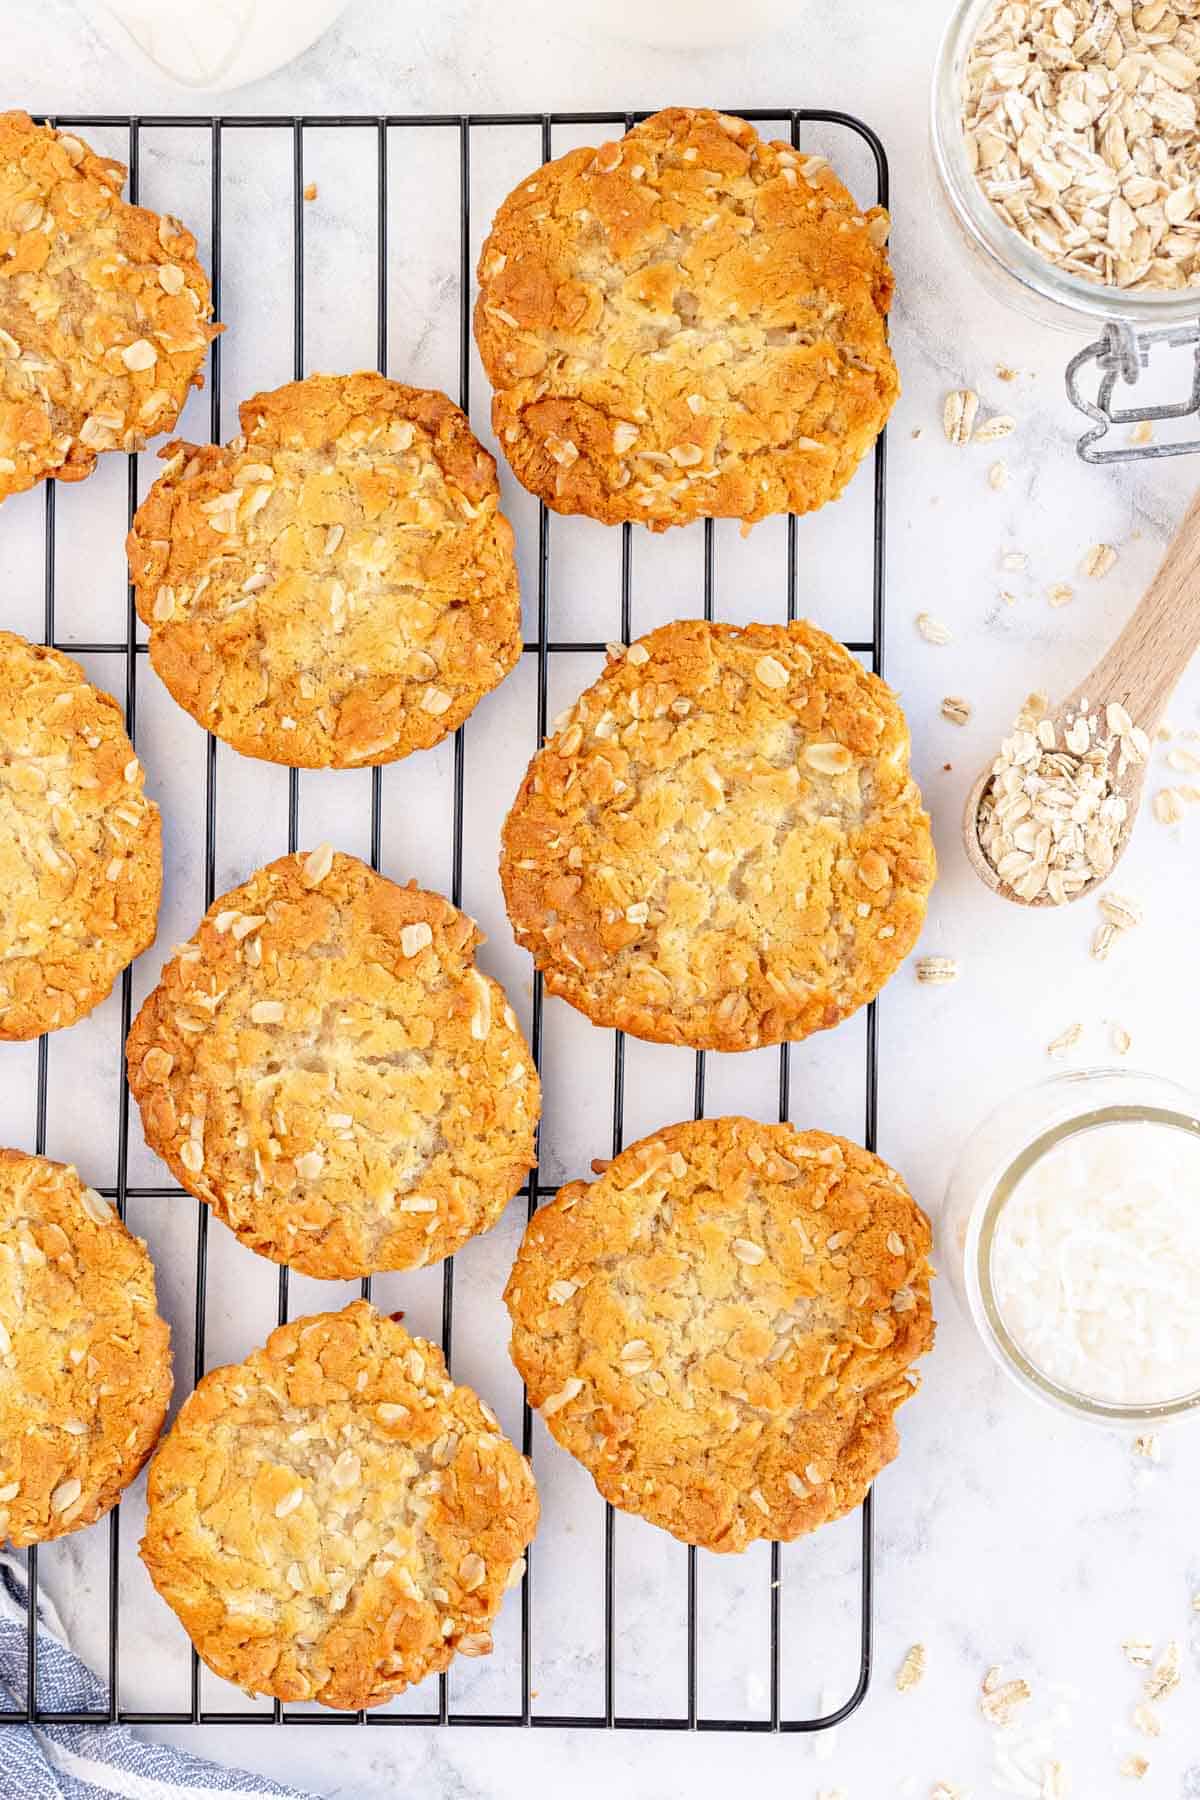 fully baked anzac biscuits on a wire rack.